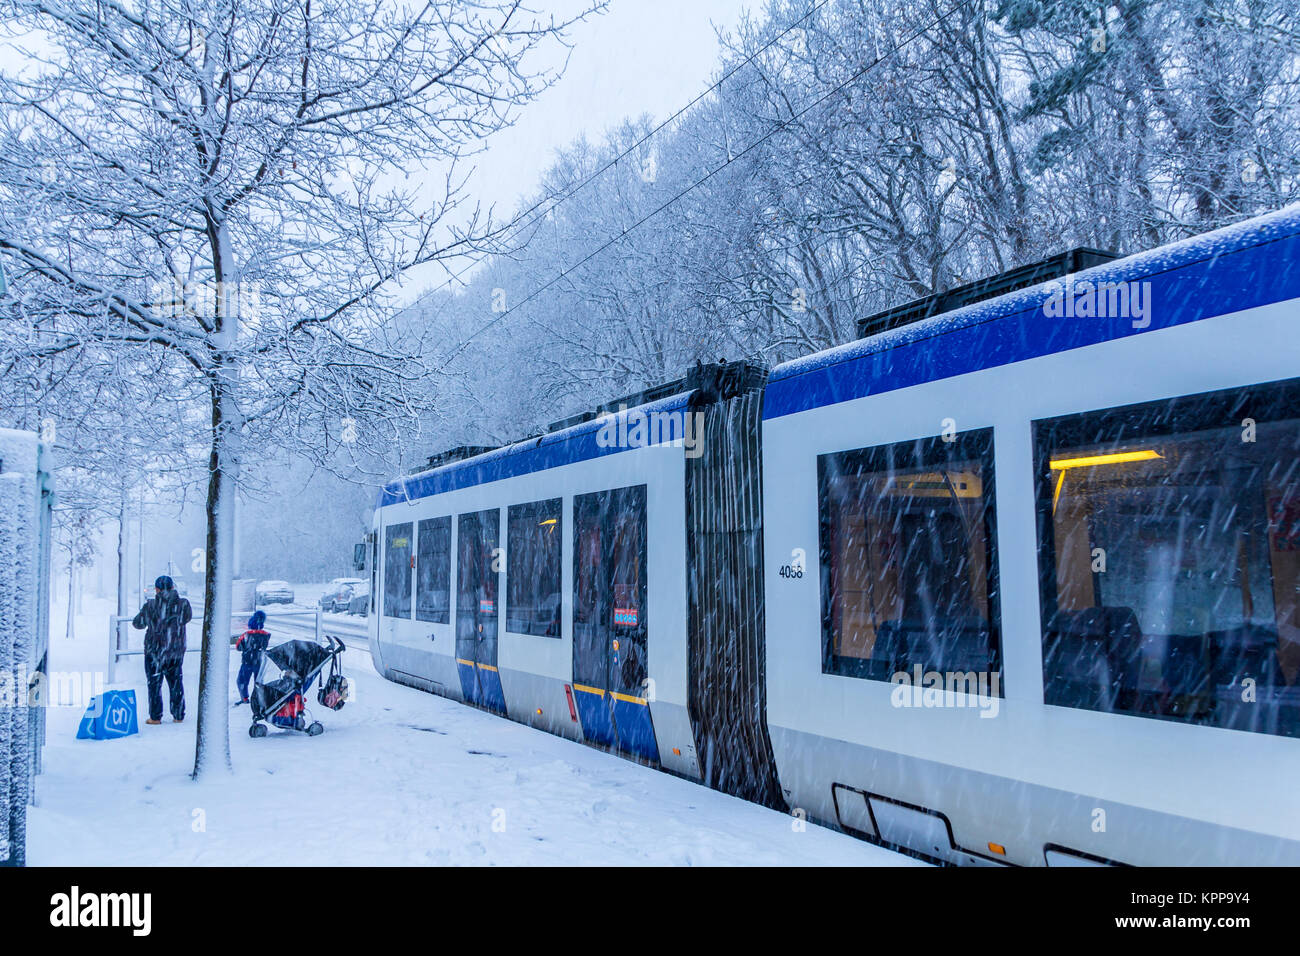 The Hague, the Netherlands - December 11, 2017: snow covered tram at Loosduinen, The Hague Stock Photo